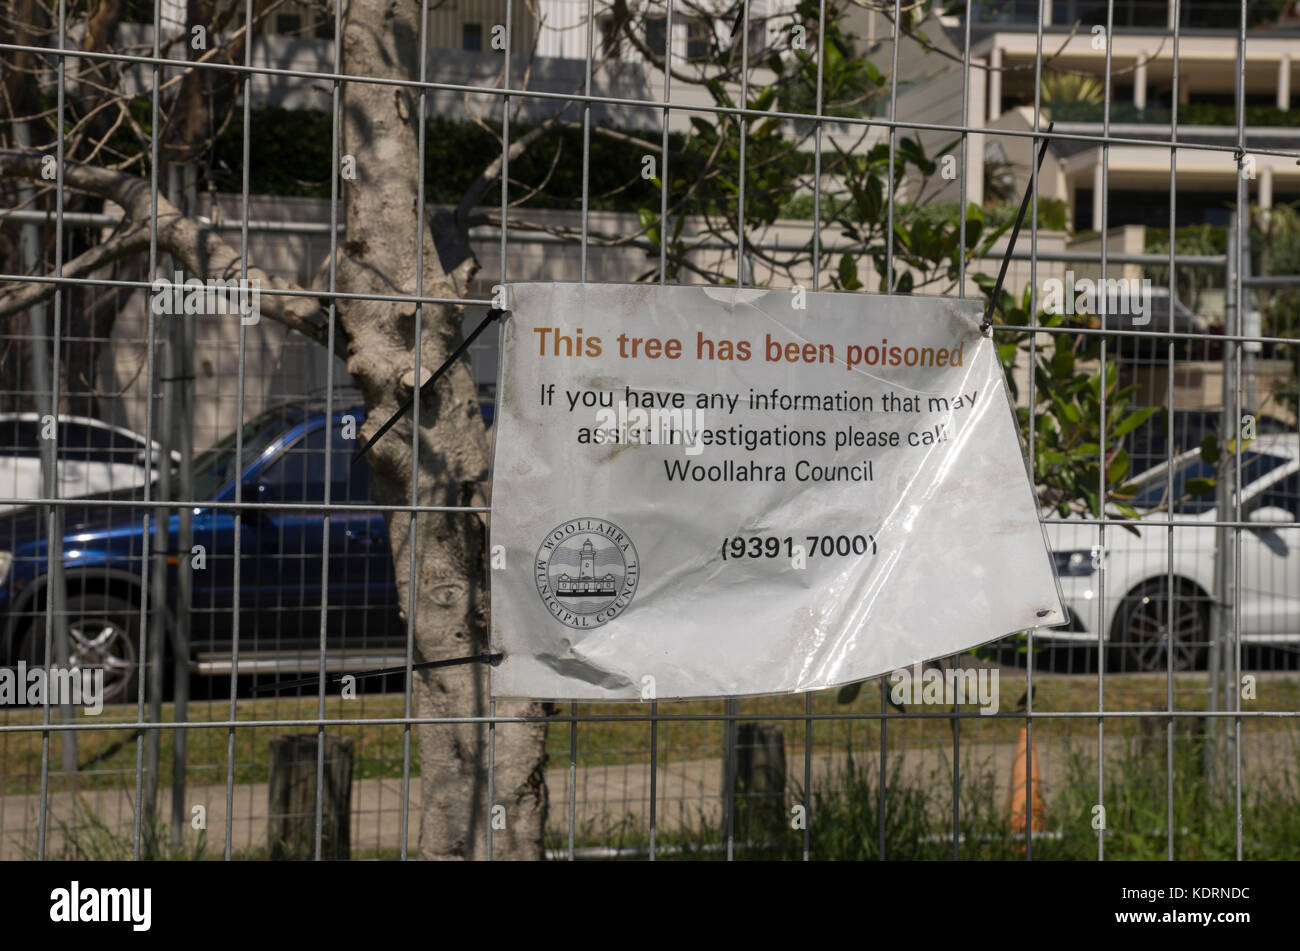 Poisoned tree notice in Rushcutters Bay, Woollahra Council, Sydney Stock Photo